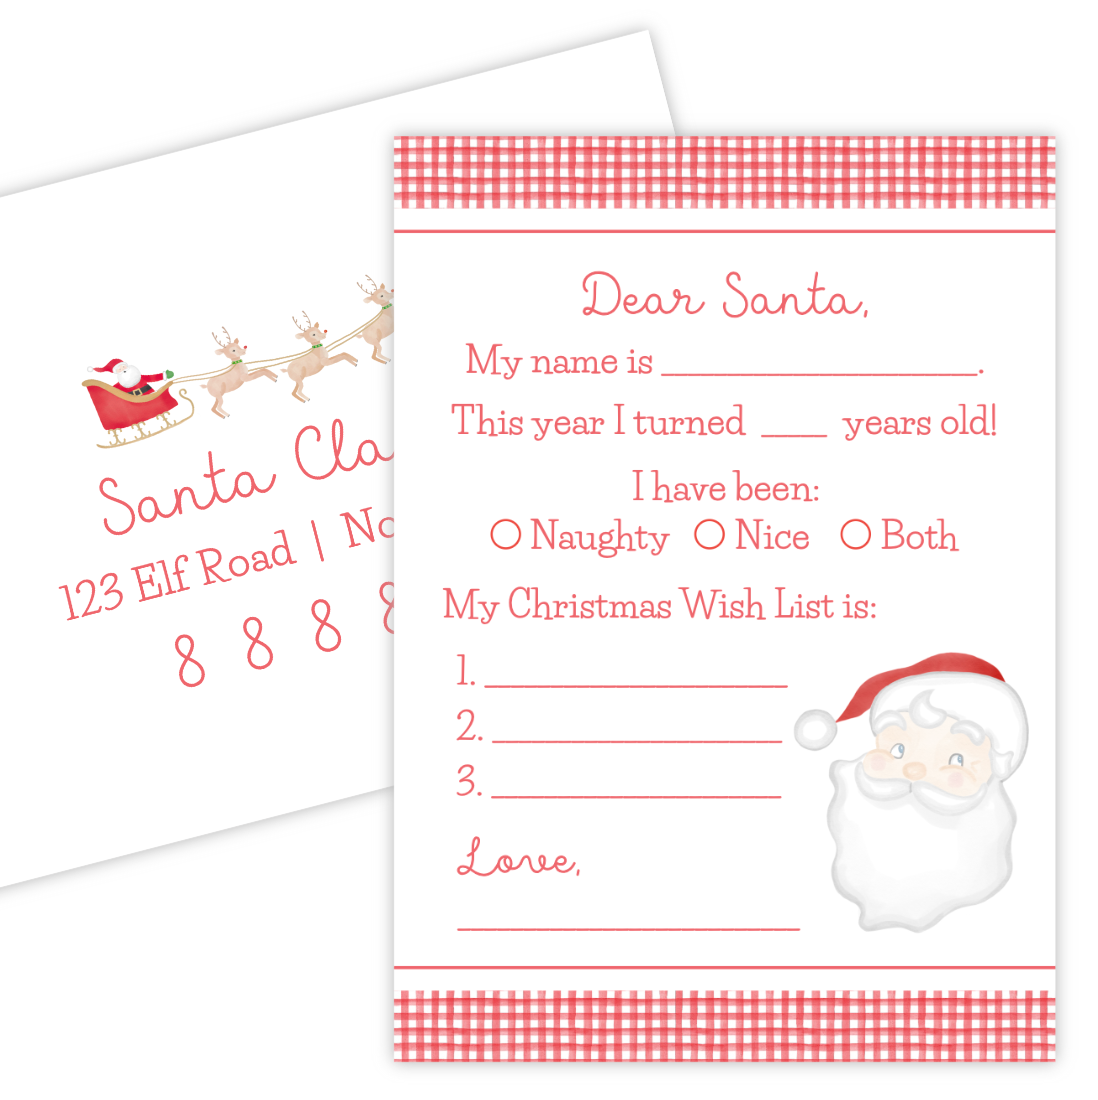 Letter to Santa with Addressed Envelope (5x7) - READY TO SHIP